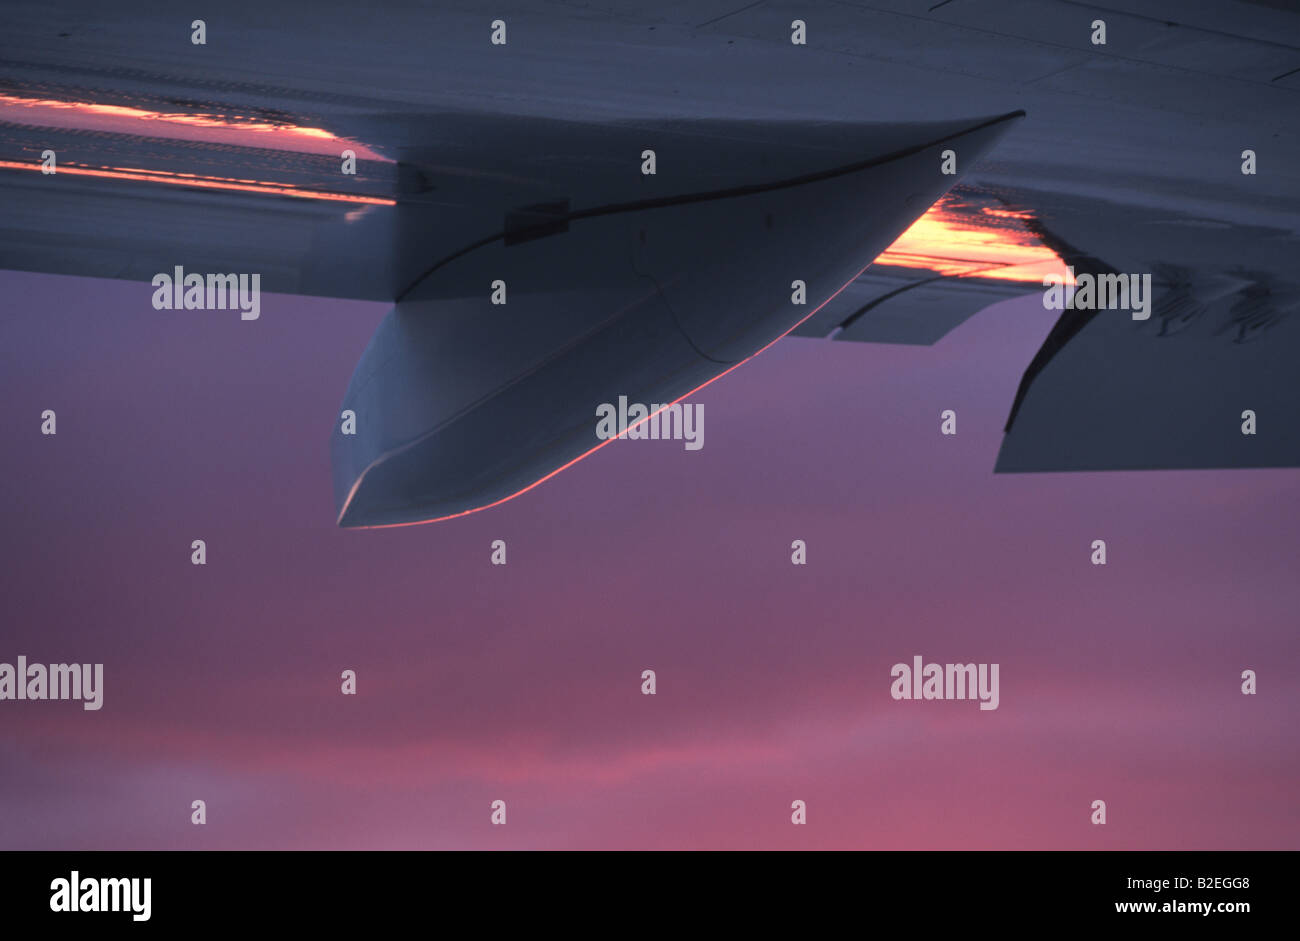 Abstract view of underside of Airbus wing Stock Photo